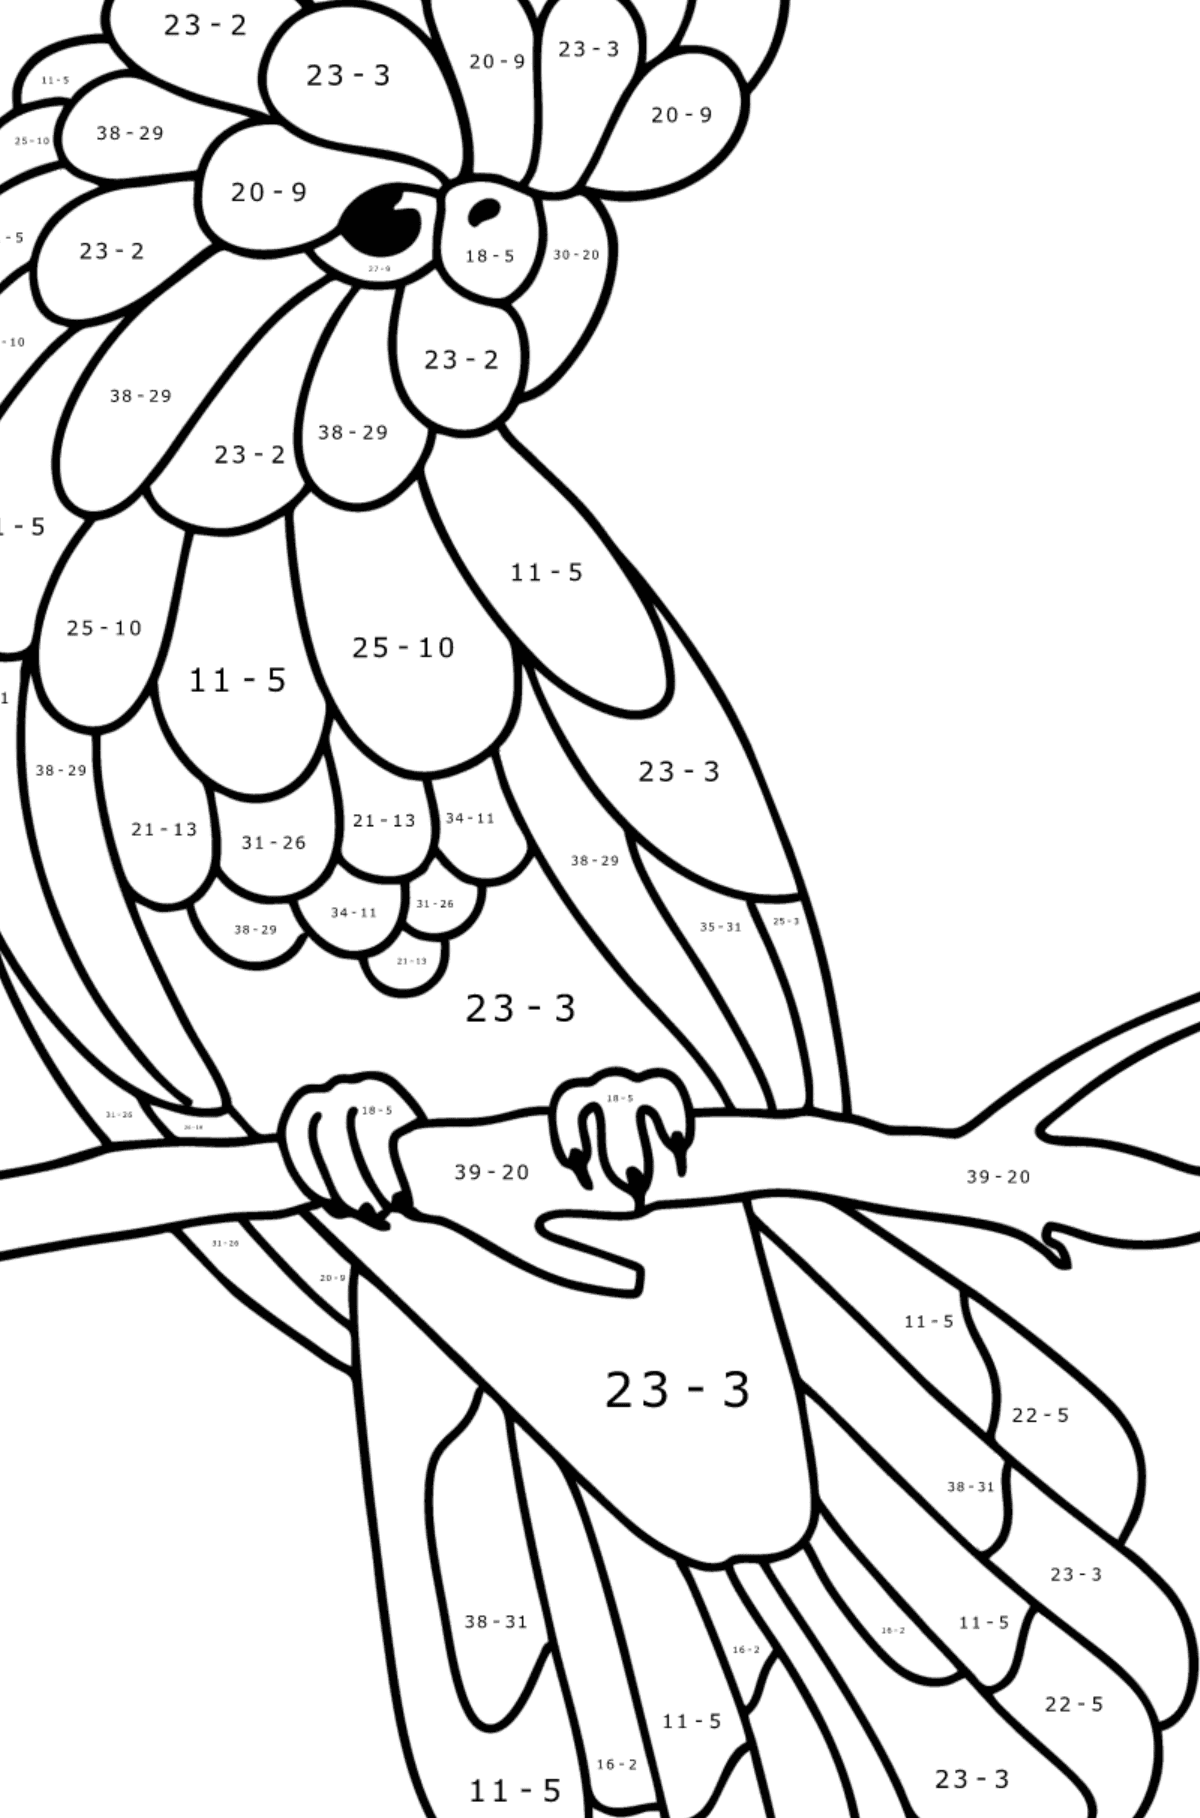 Black cockatoo сoloring page - Math Coloring - Subtraction for Kids